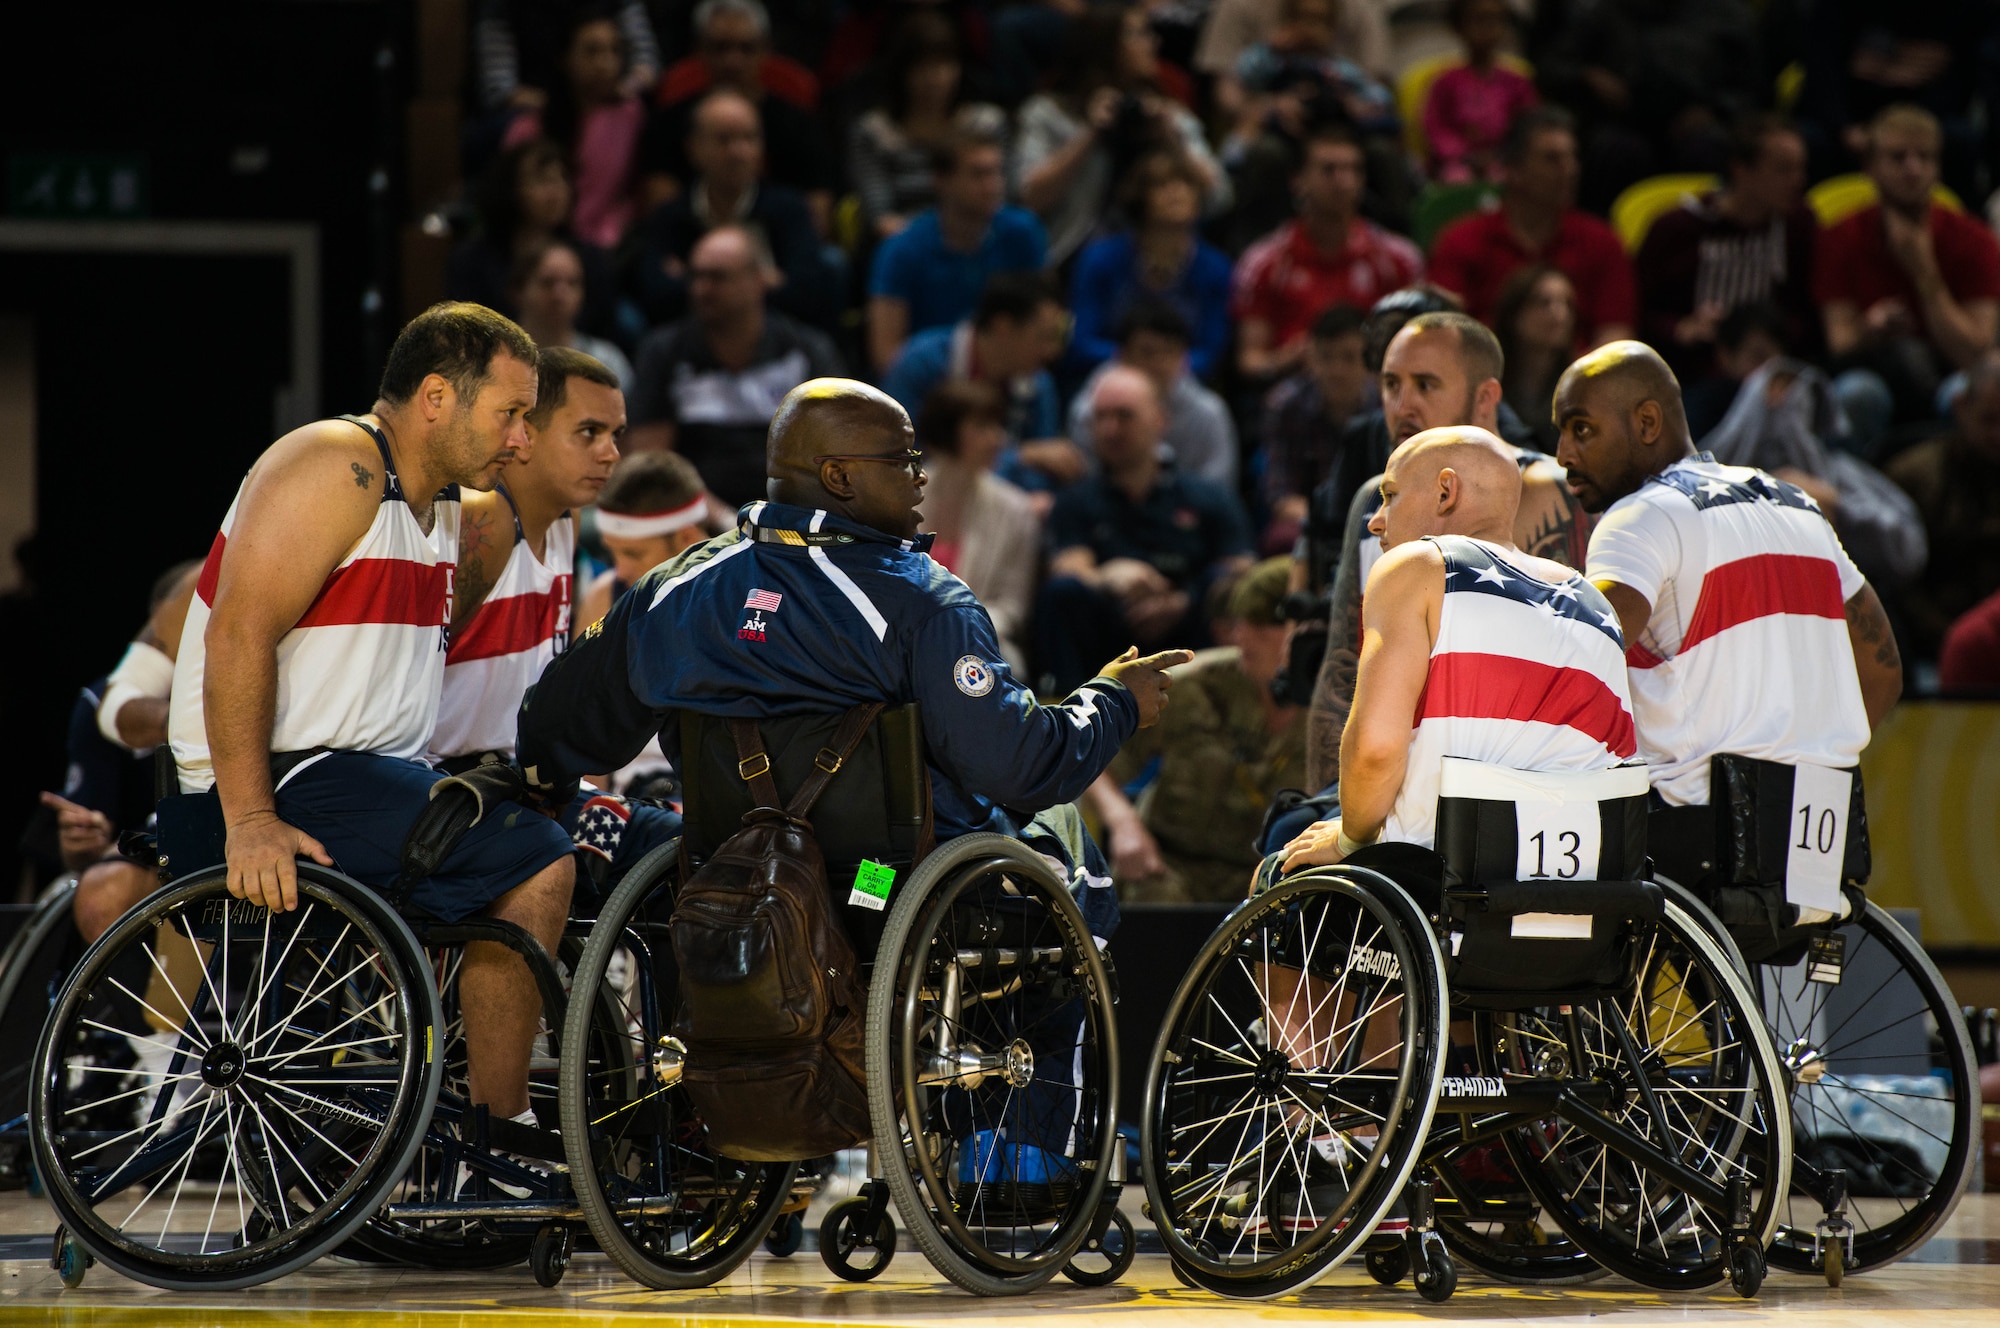 The U.S. fought hard in the wheelchair basketball finals, but fell 19-9 to Great Britain to take silver at the inaugural Invictus Games Sept. 13, in London. The Invictus Games featured athletes competing in various Paralympic-style events, including swimming, track and field, seated volleyball, wheelchair basketball, and wheelchair rugby, among others. (Courtesy photo)